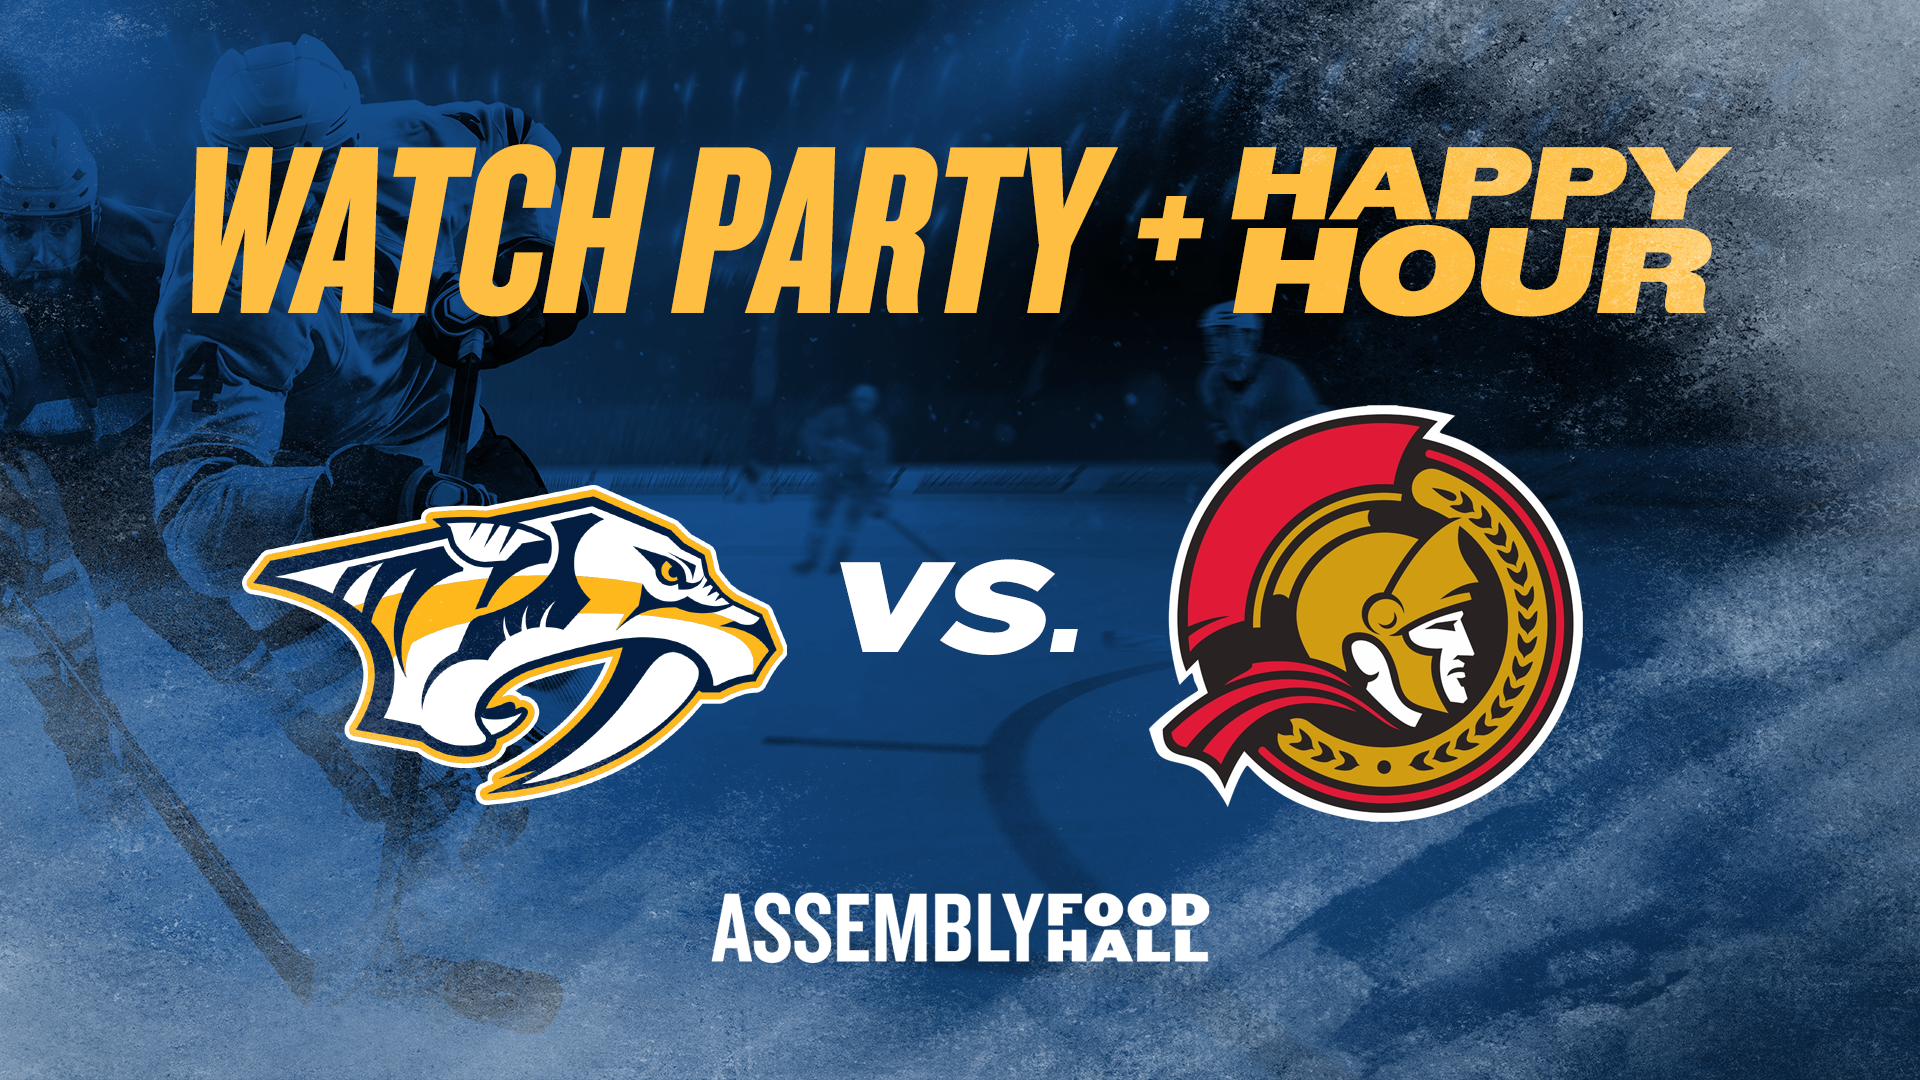 Predators vs Maple Leafs Watch Party and Happy Hour Assembly Food Hall